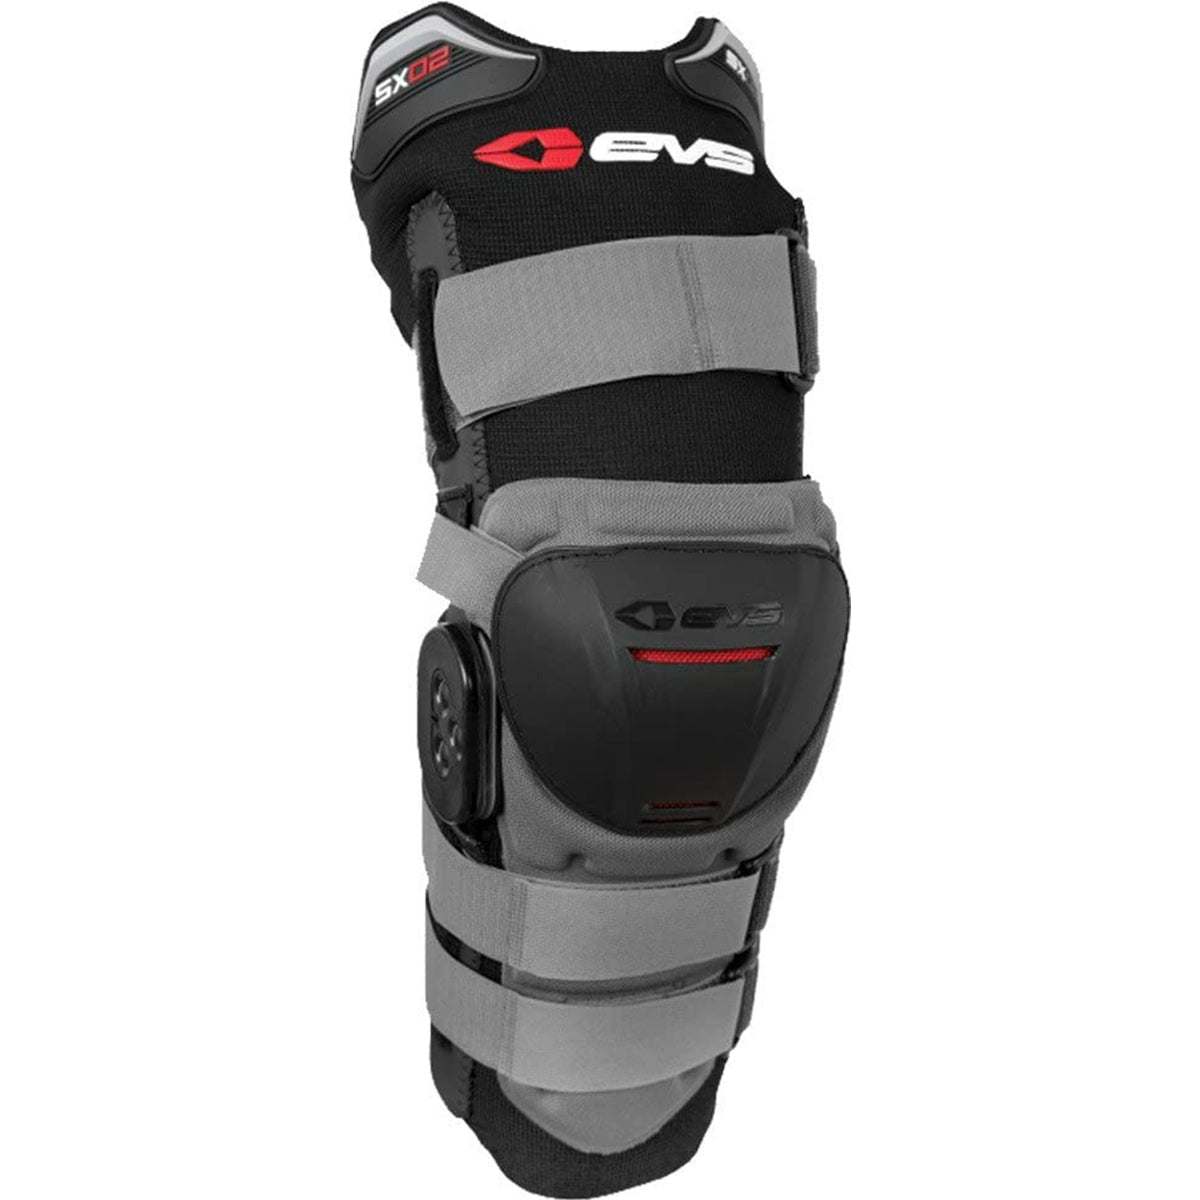 EVS SX02 Knee Guard Adult Off-Road Body Armor-663